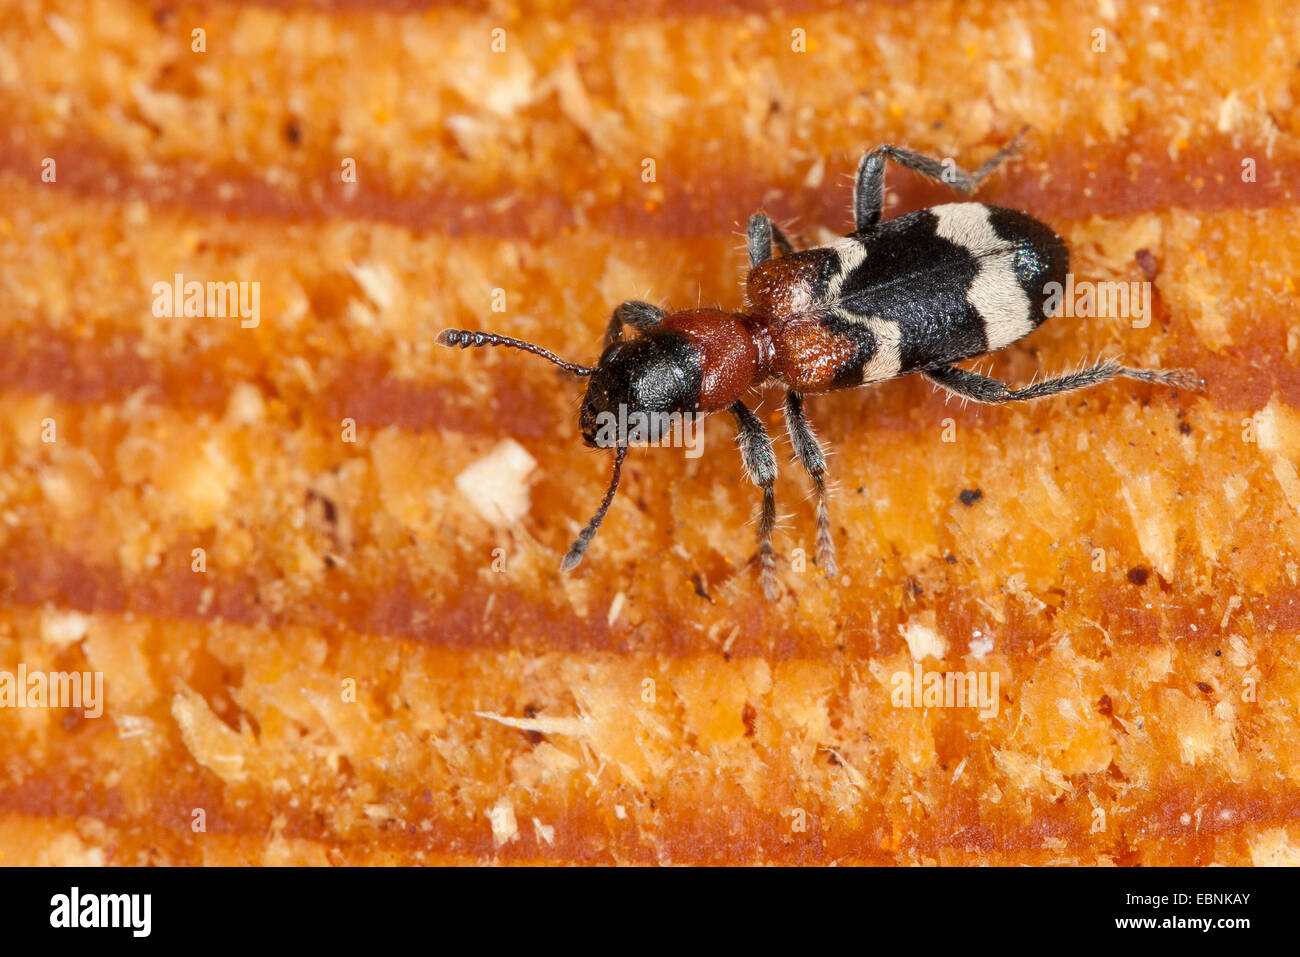 Ant beetle, European Red-bellied Clerid (Thanasimus formicarius), view from above, Germany Stock Photo